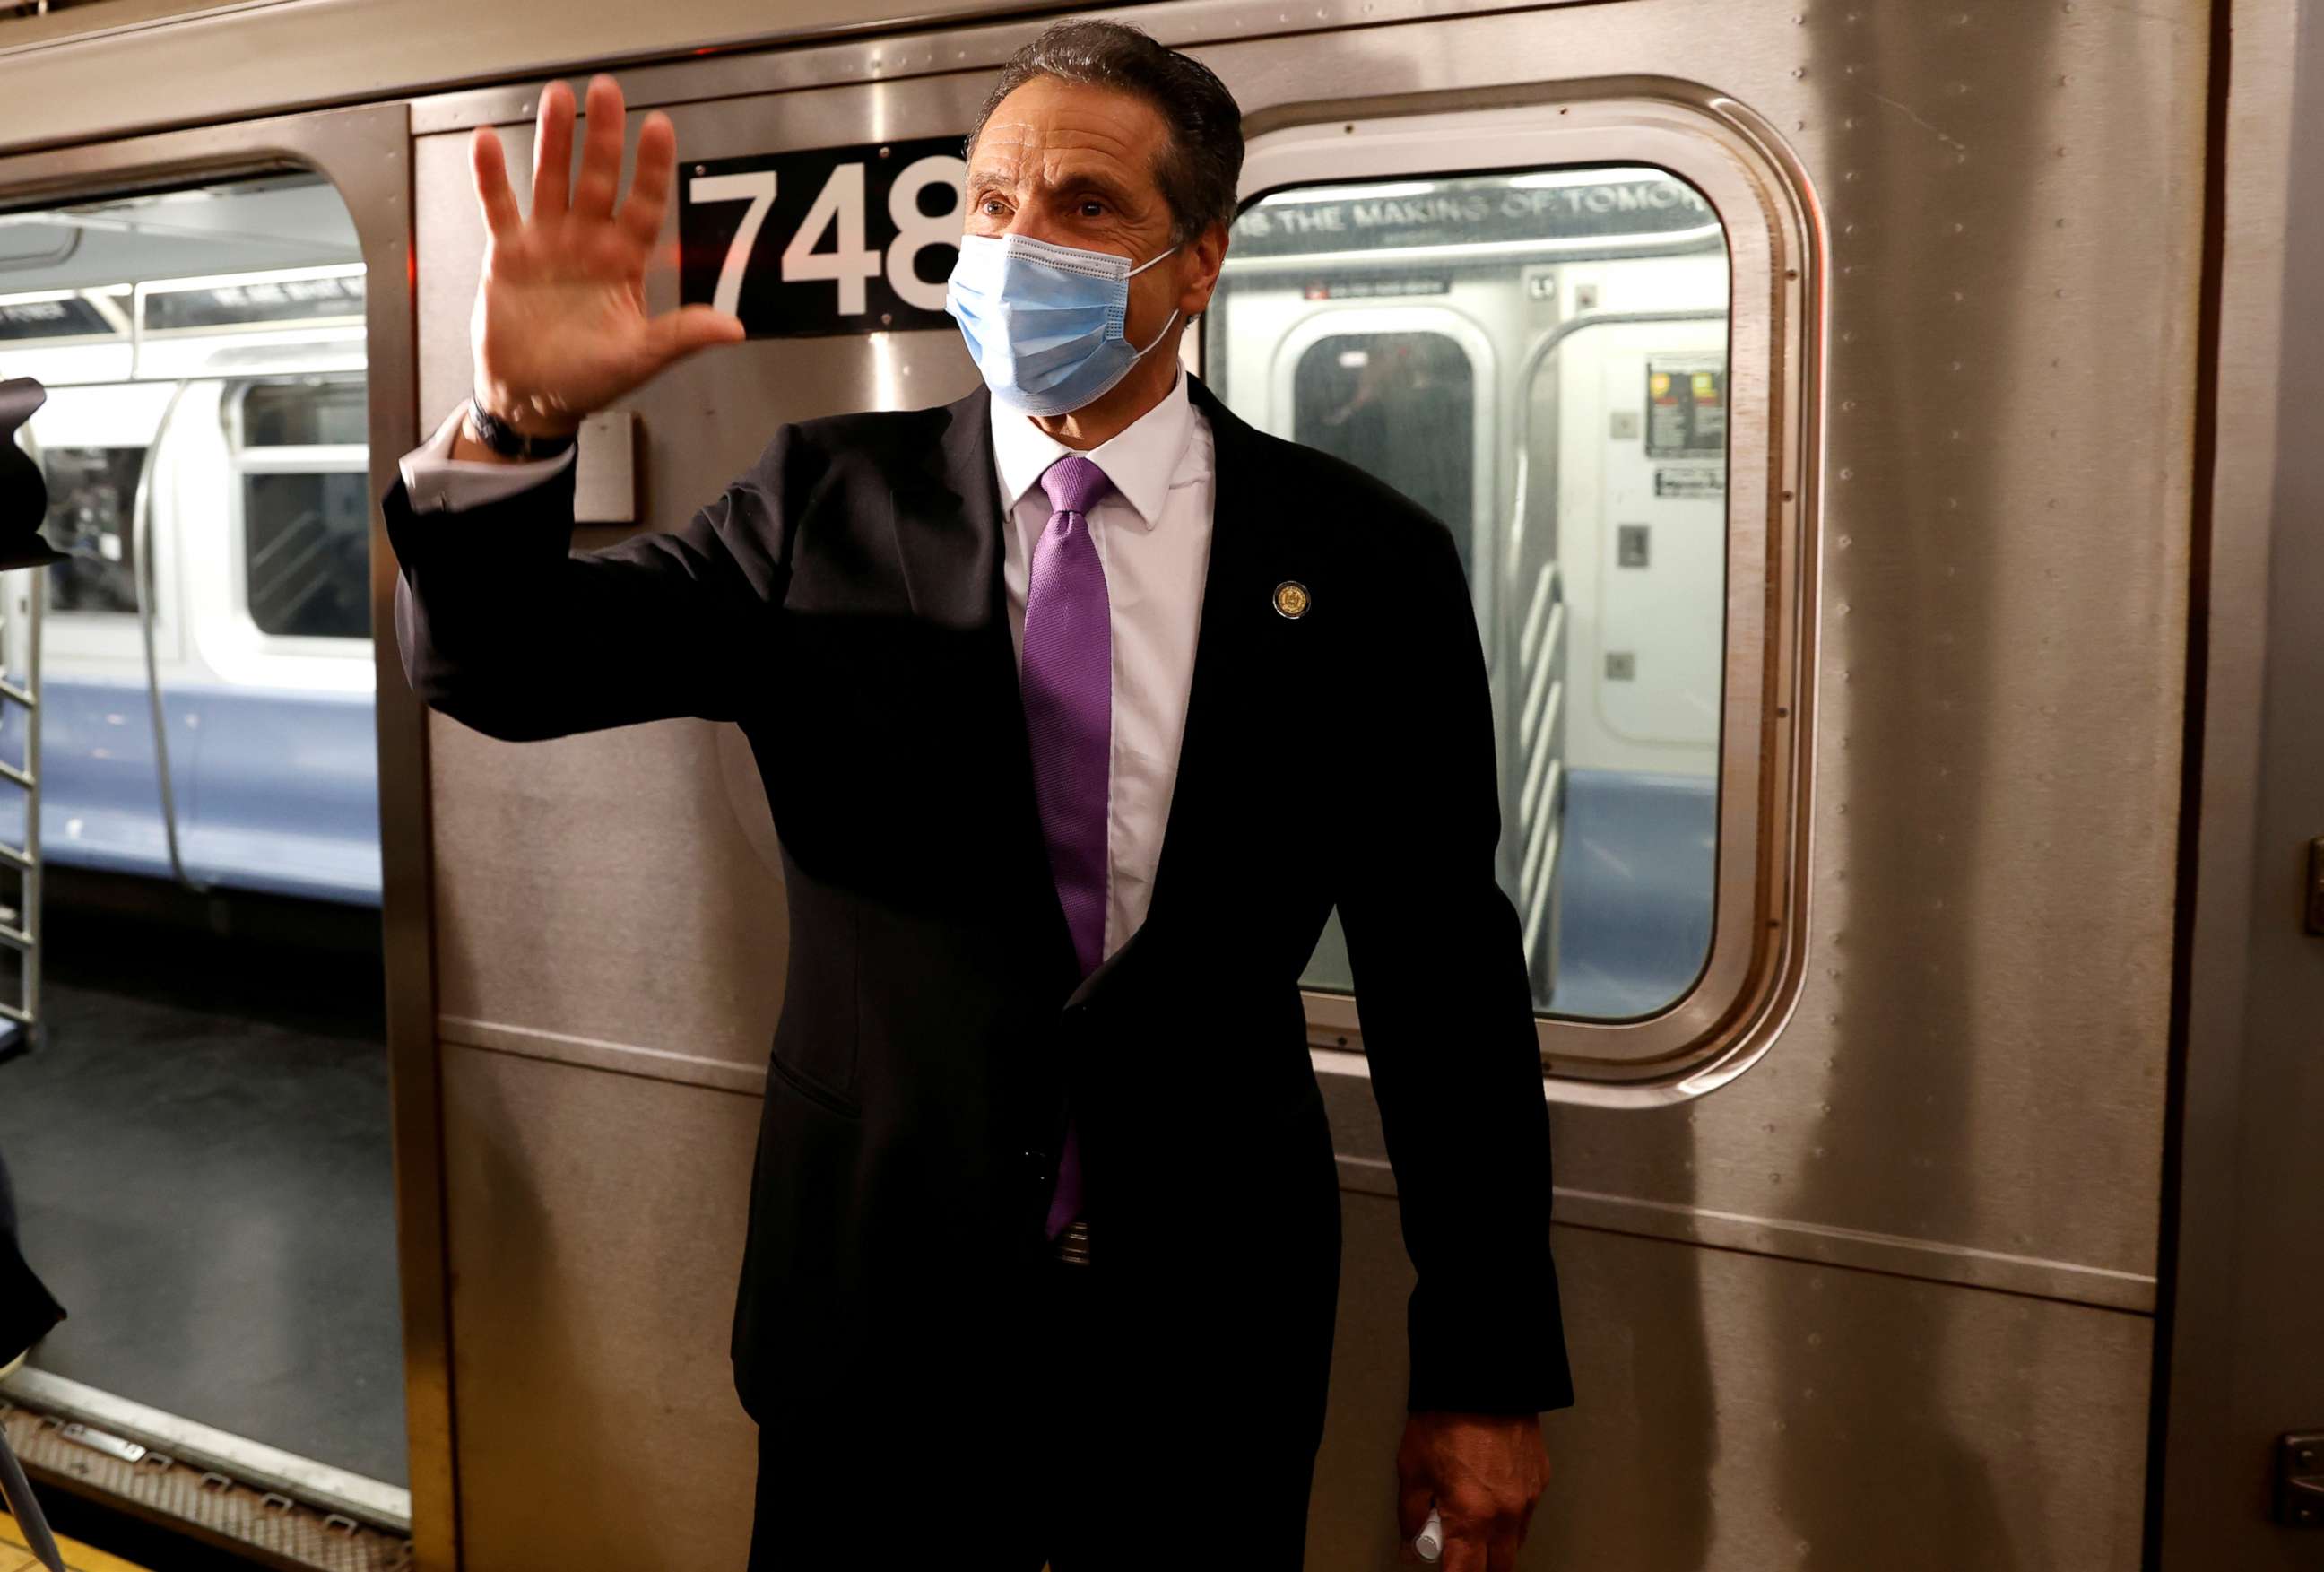 PHOTO: New York Governor Andrew Cuomo exits a #7 Subway train in Manhattan on the first day of New York City's phase one reopening during the outbreak of coronavirus in New York, June 8, 2020.